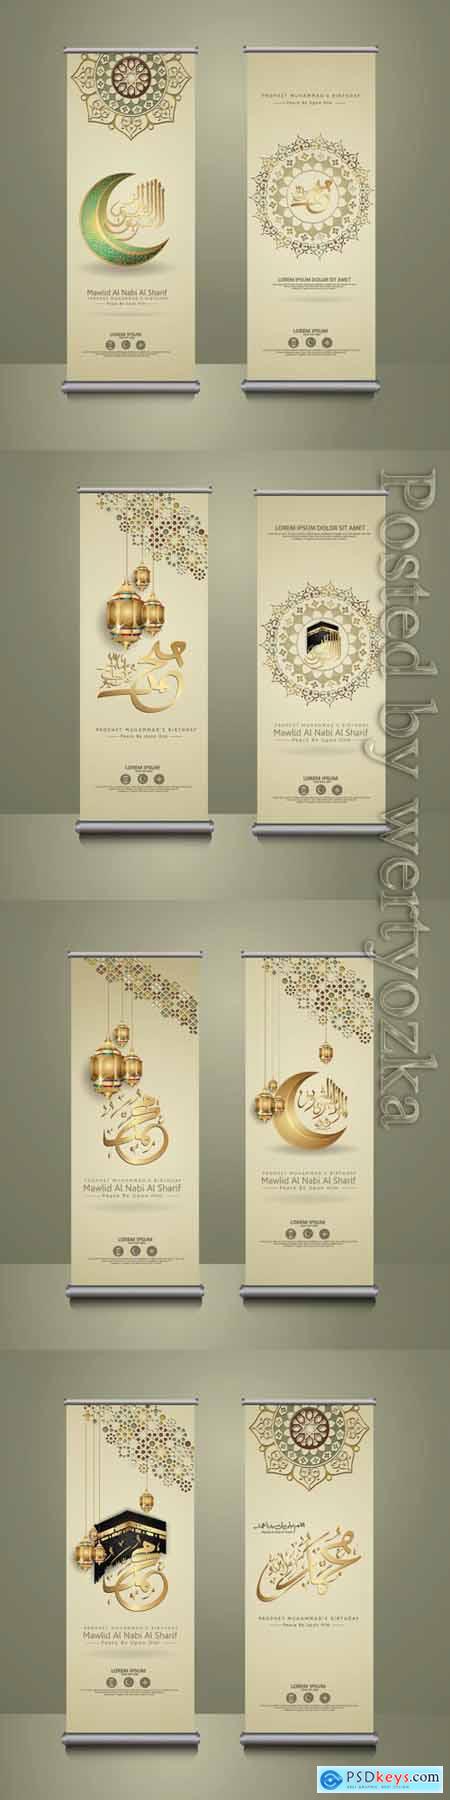 Roll up banner, prophet Muhammad in arabic calligraphy with golden Islamic ornamental